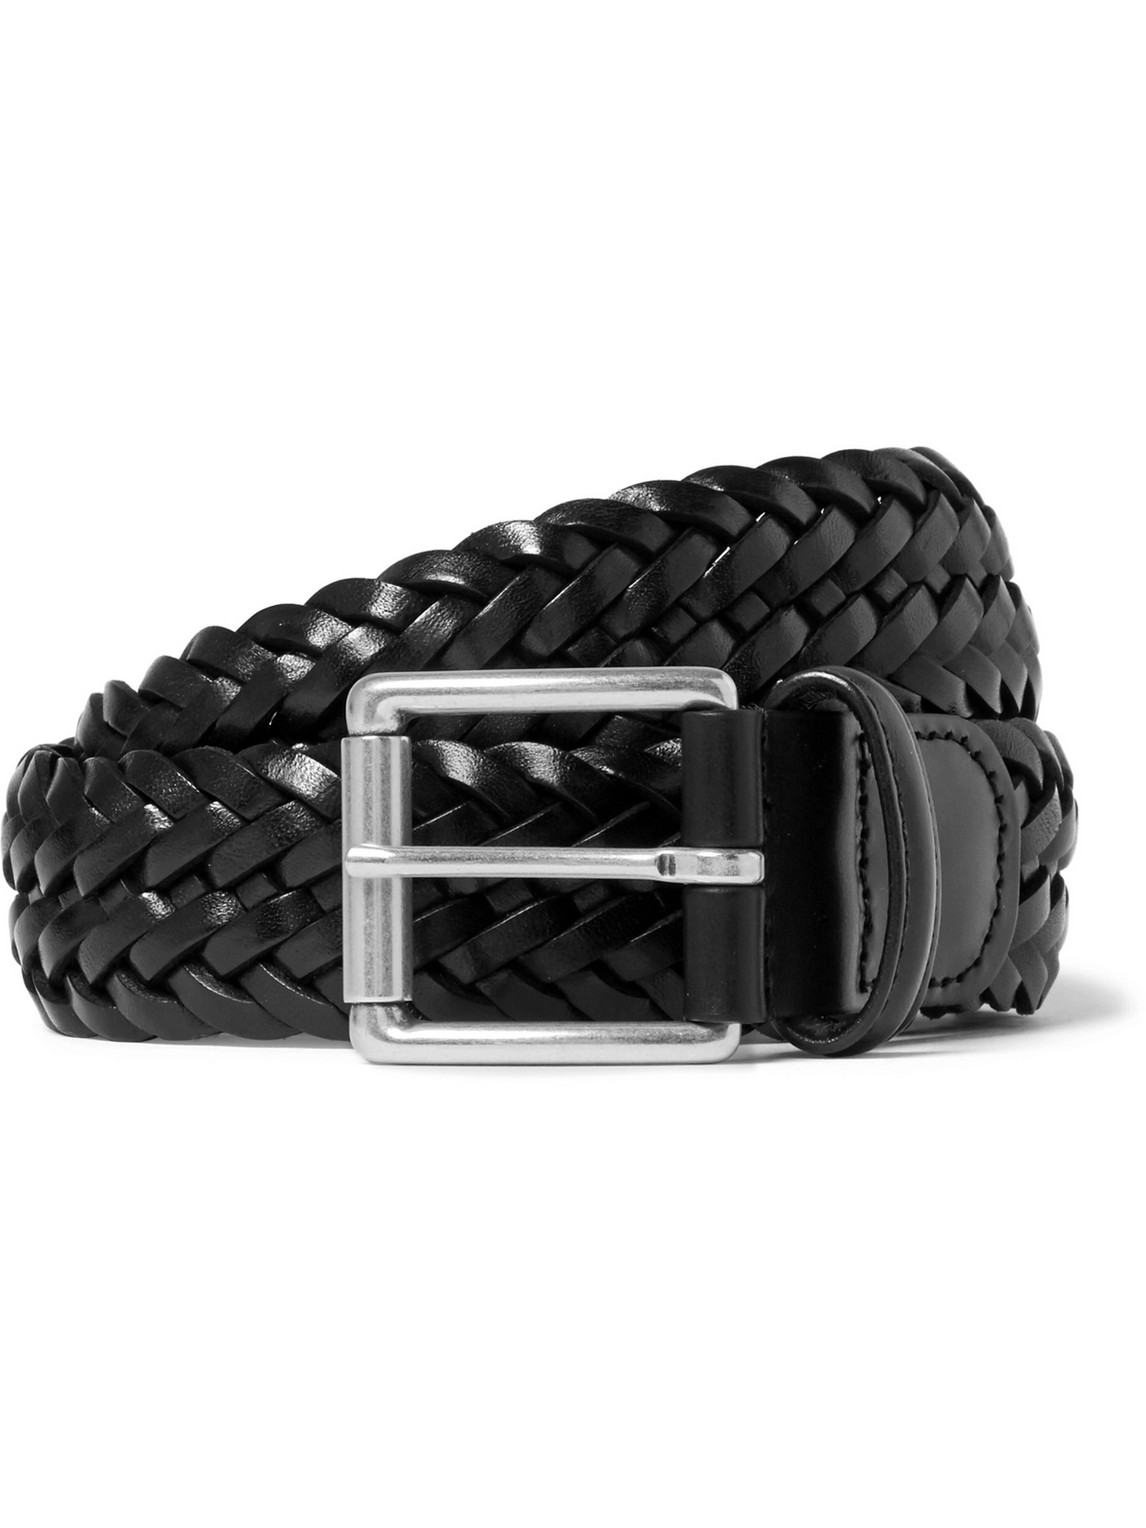 ANDERSON'S 3.5CM WOVEN LEATHER BELT